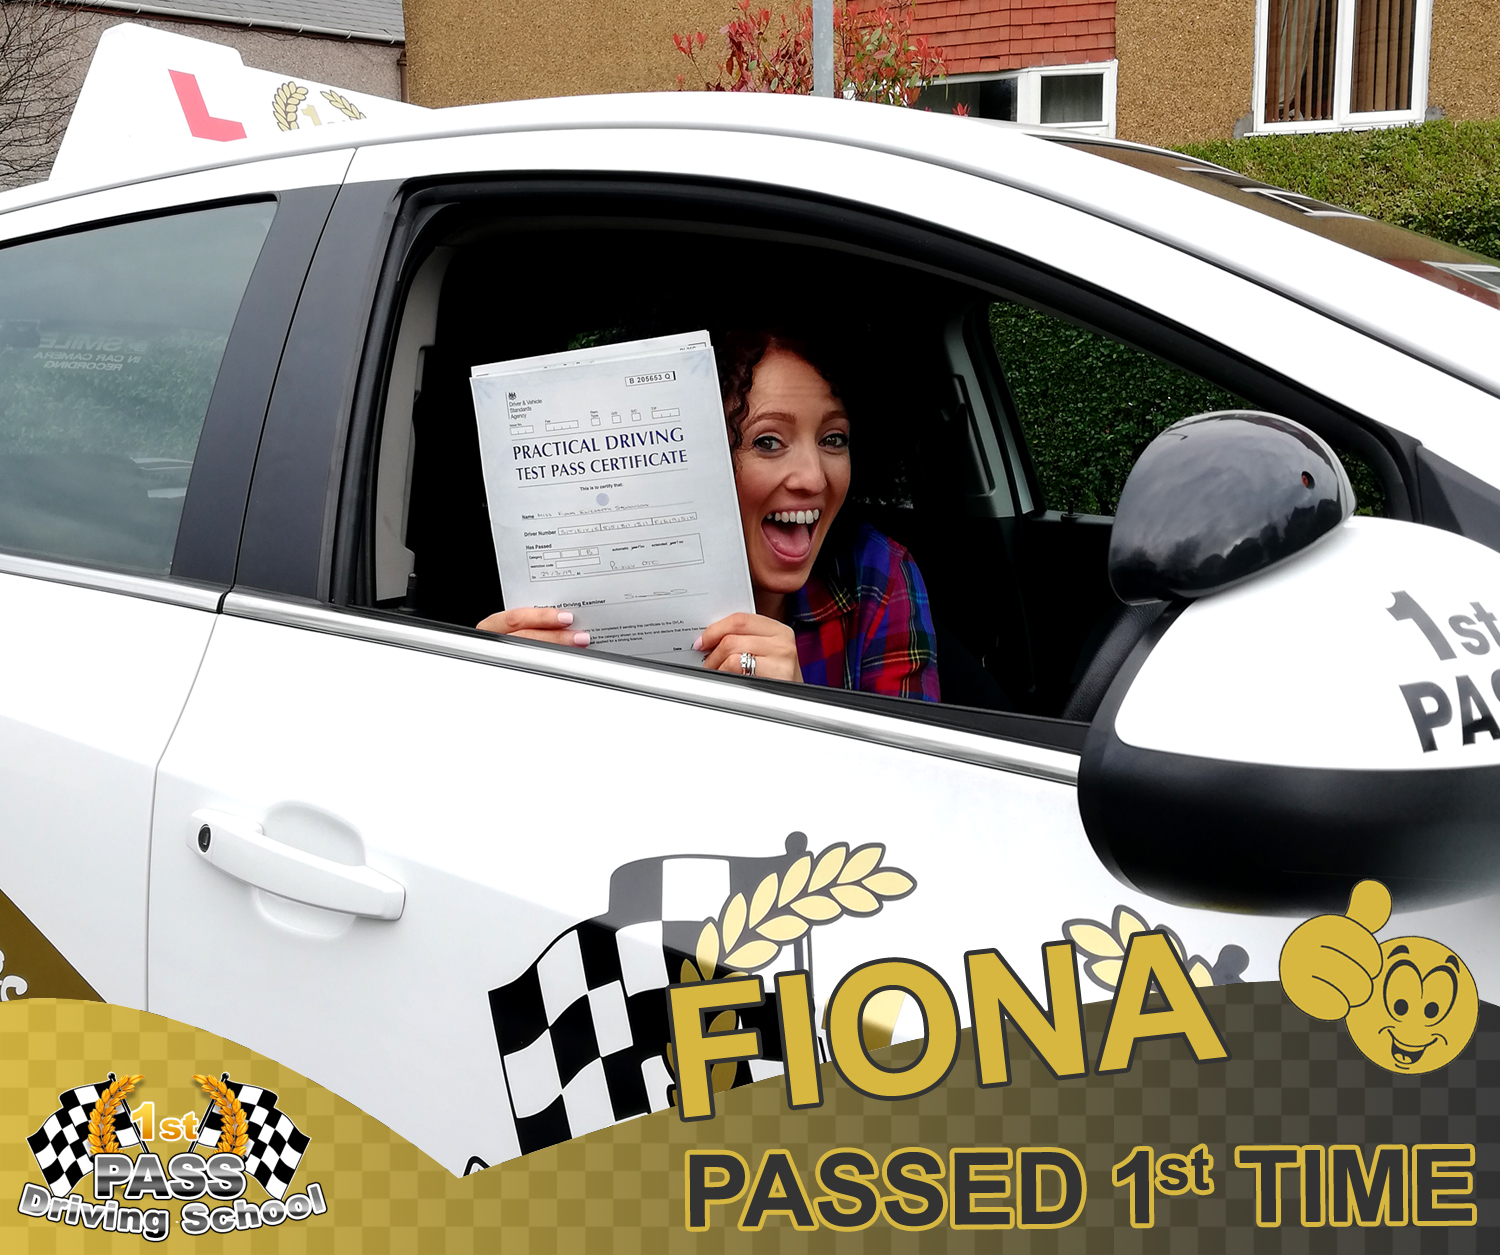 Fiona took driving lessons with 1st Pass Driving School – Renfrewshire's Automatic Driving School